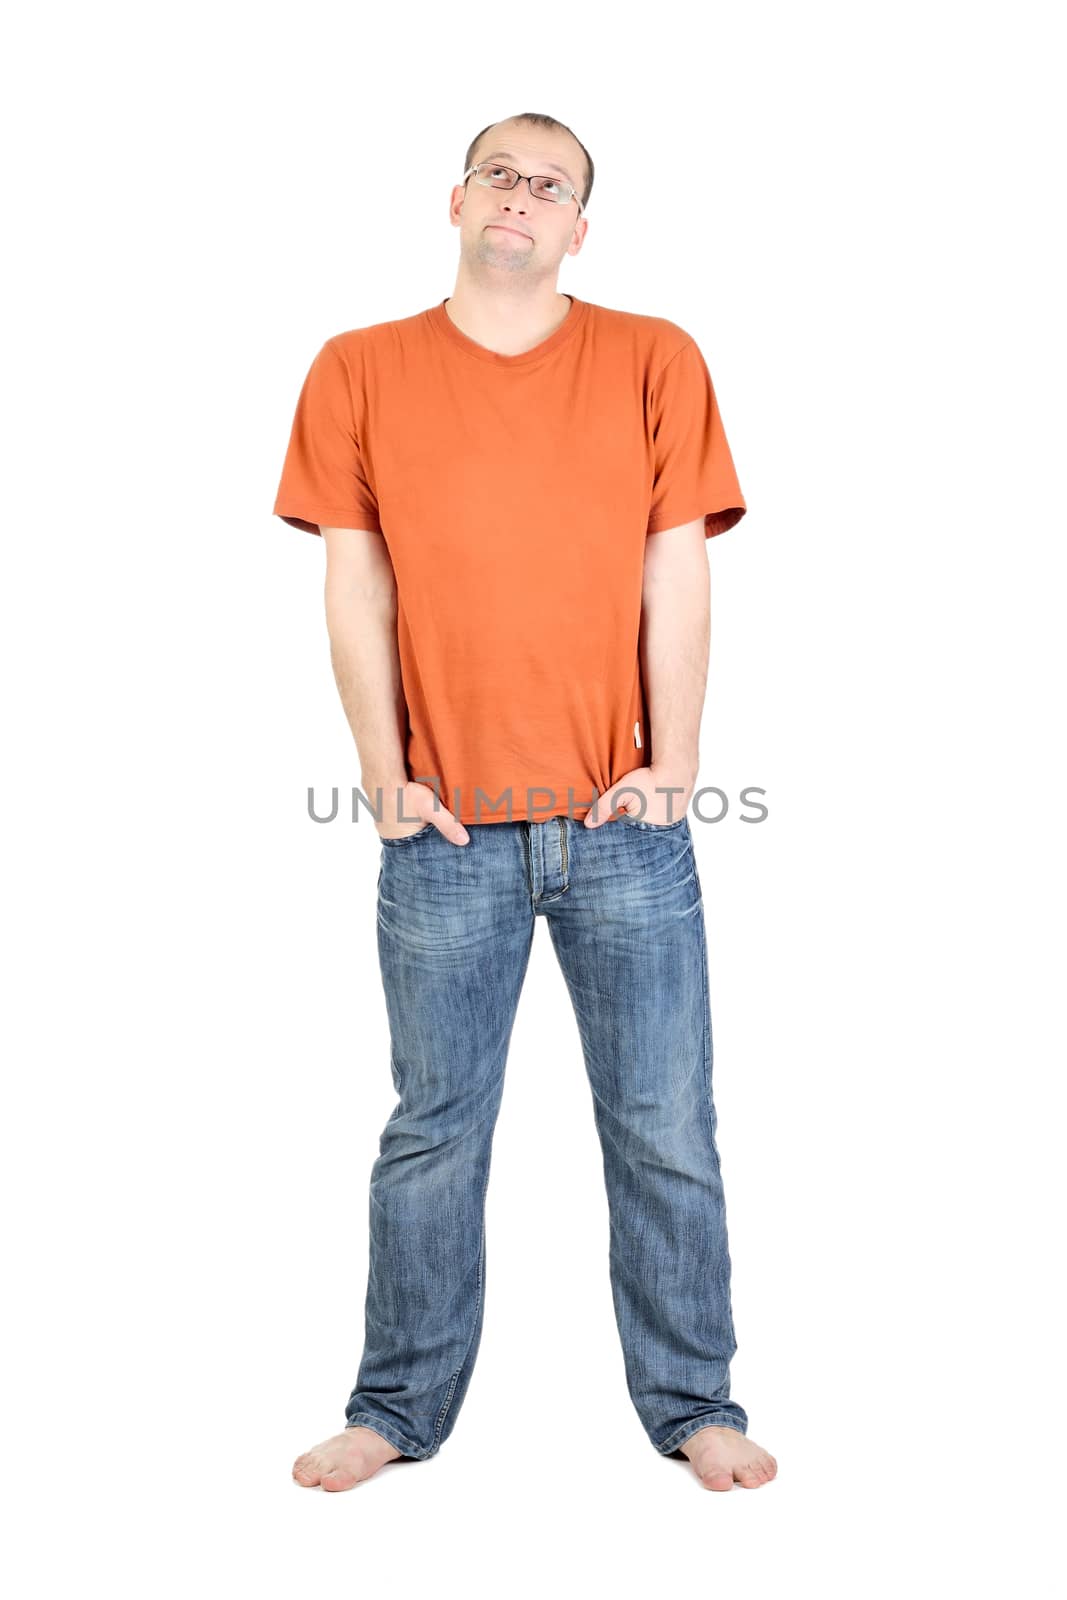 Pensive young man looking isolated on the white